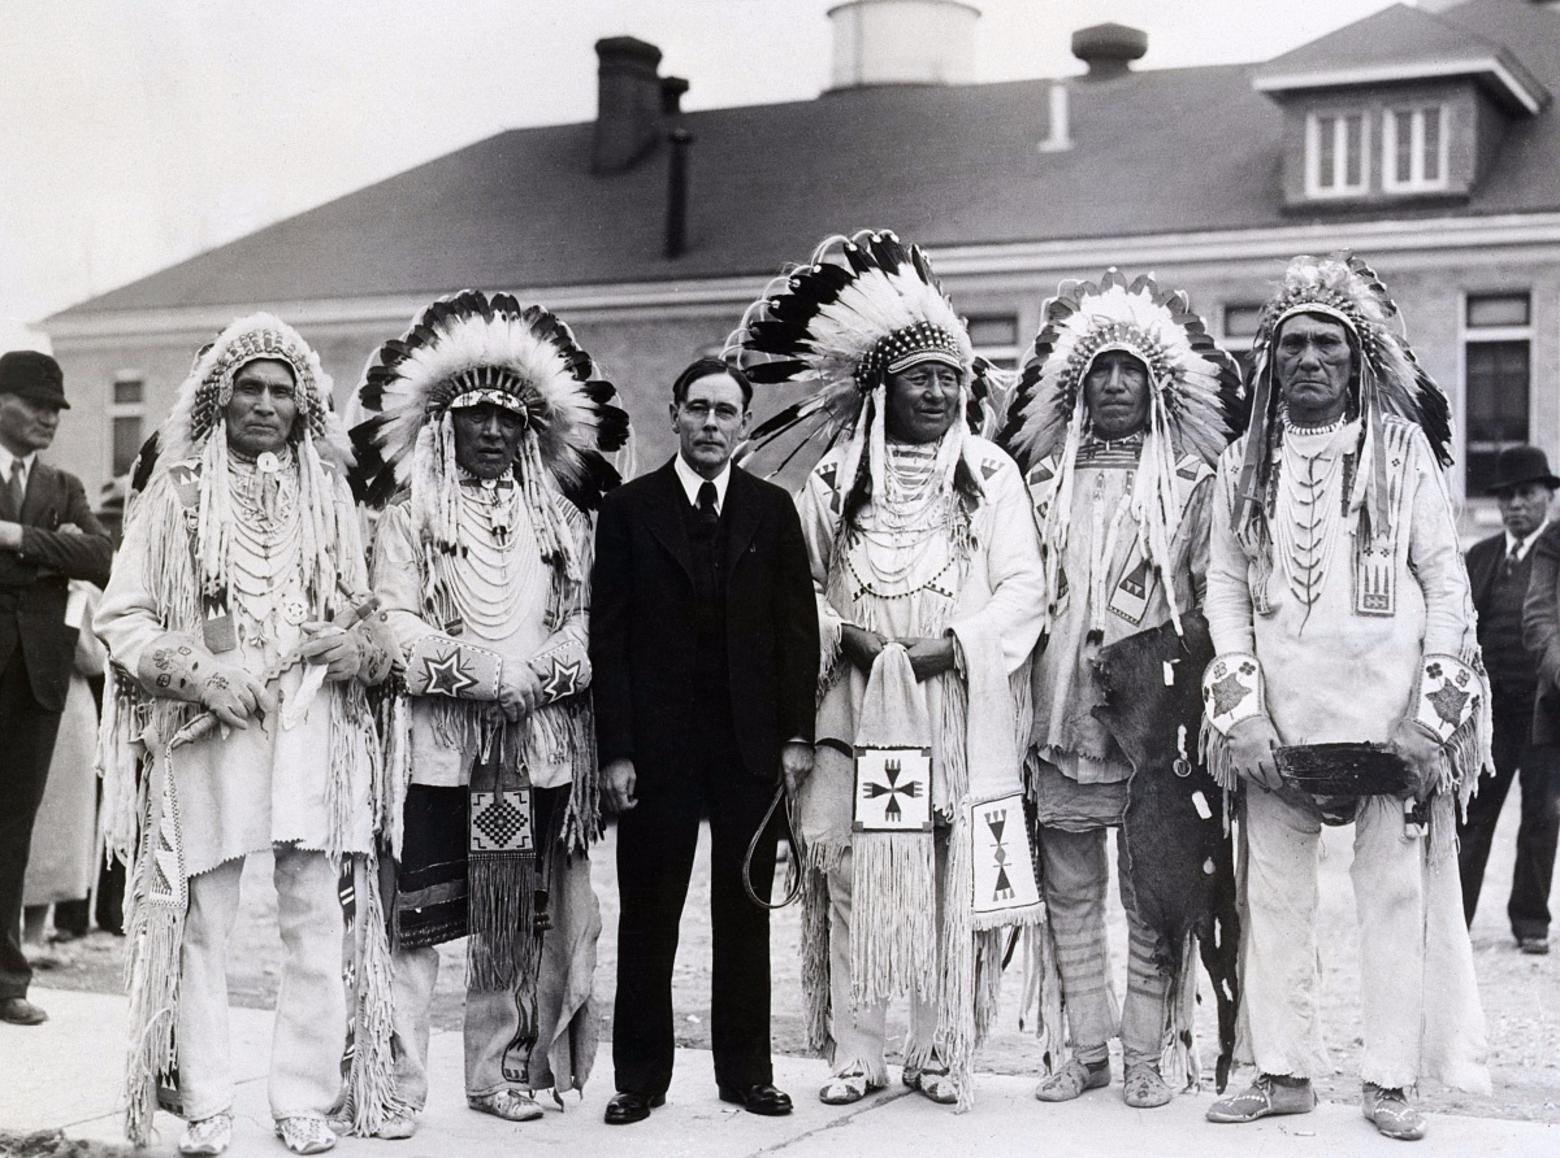 John Collier, reforming commissioner of the Bureau of Indian Affairs, the oldest agency in the US Interior Department, meets with members of the Blackfeet Nation in 1934.  Collier, a controversial figure, tried to reverse centuries of racist and genocidal policies toward native people through the &quot;Indian New Deal&quot; which was itself flawed and met with hostility from indigenous people who felt he perpetuated his own patriarchal, racist stereotypes. Photo courtesy Library of Congress